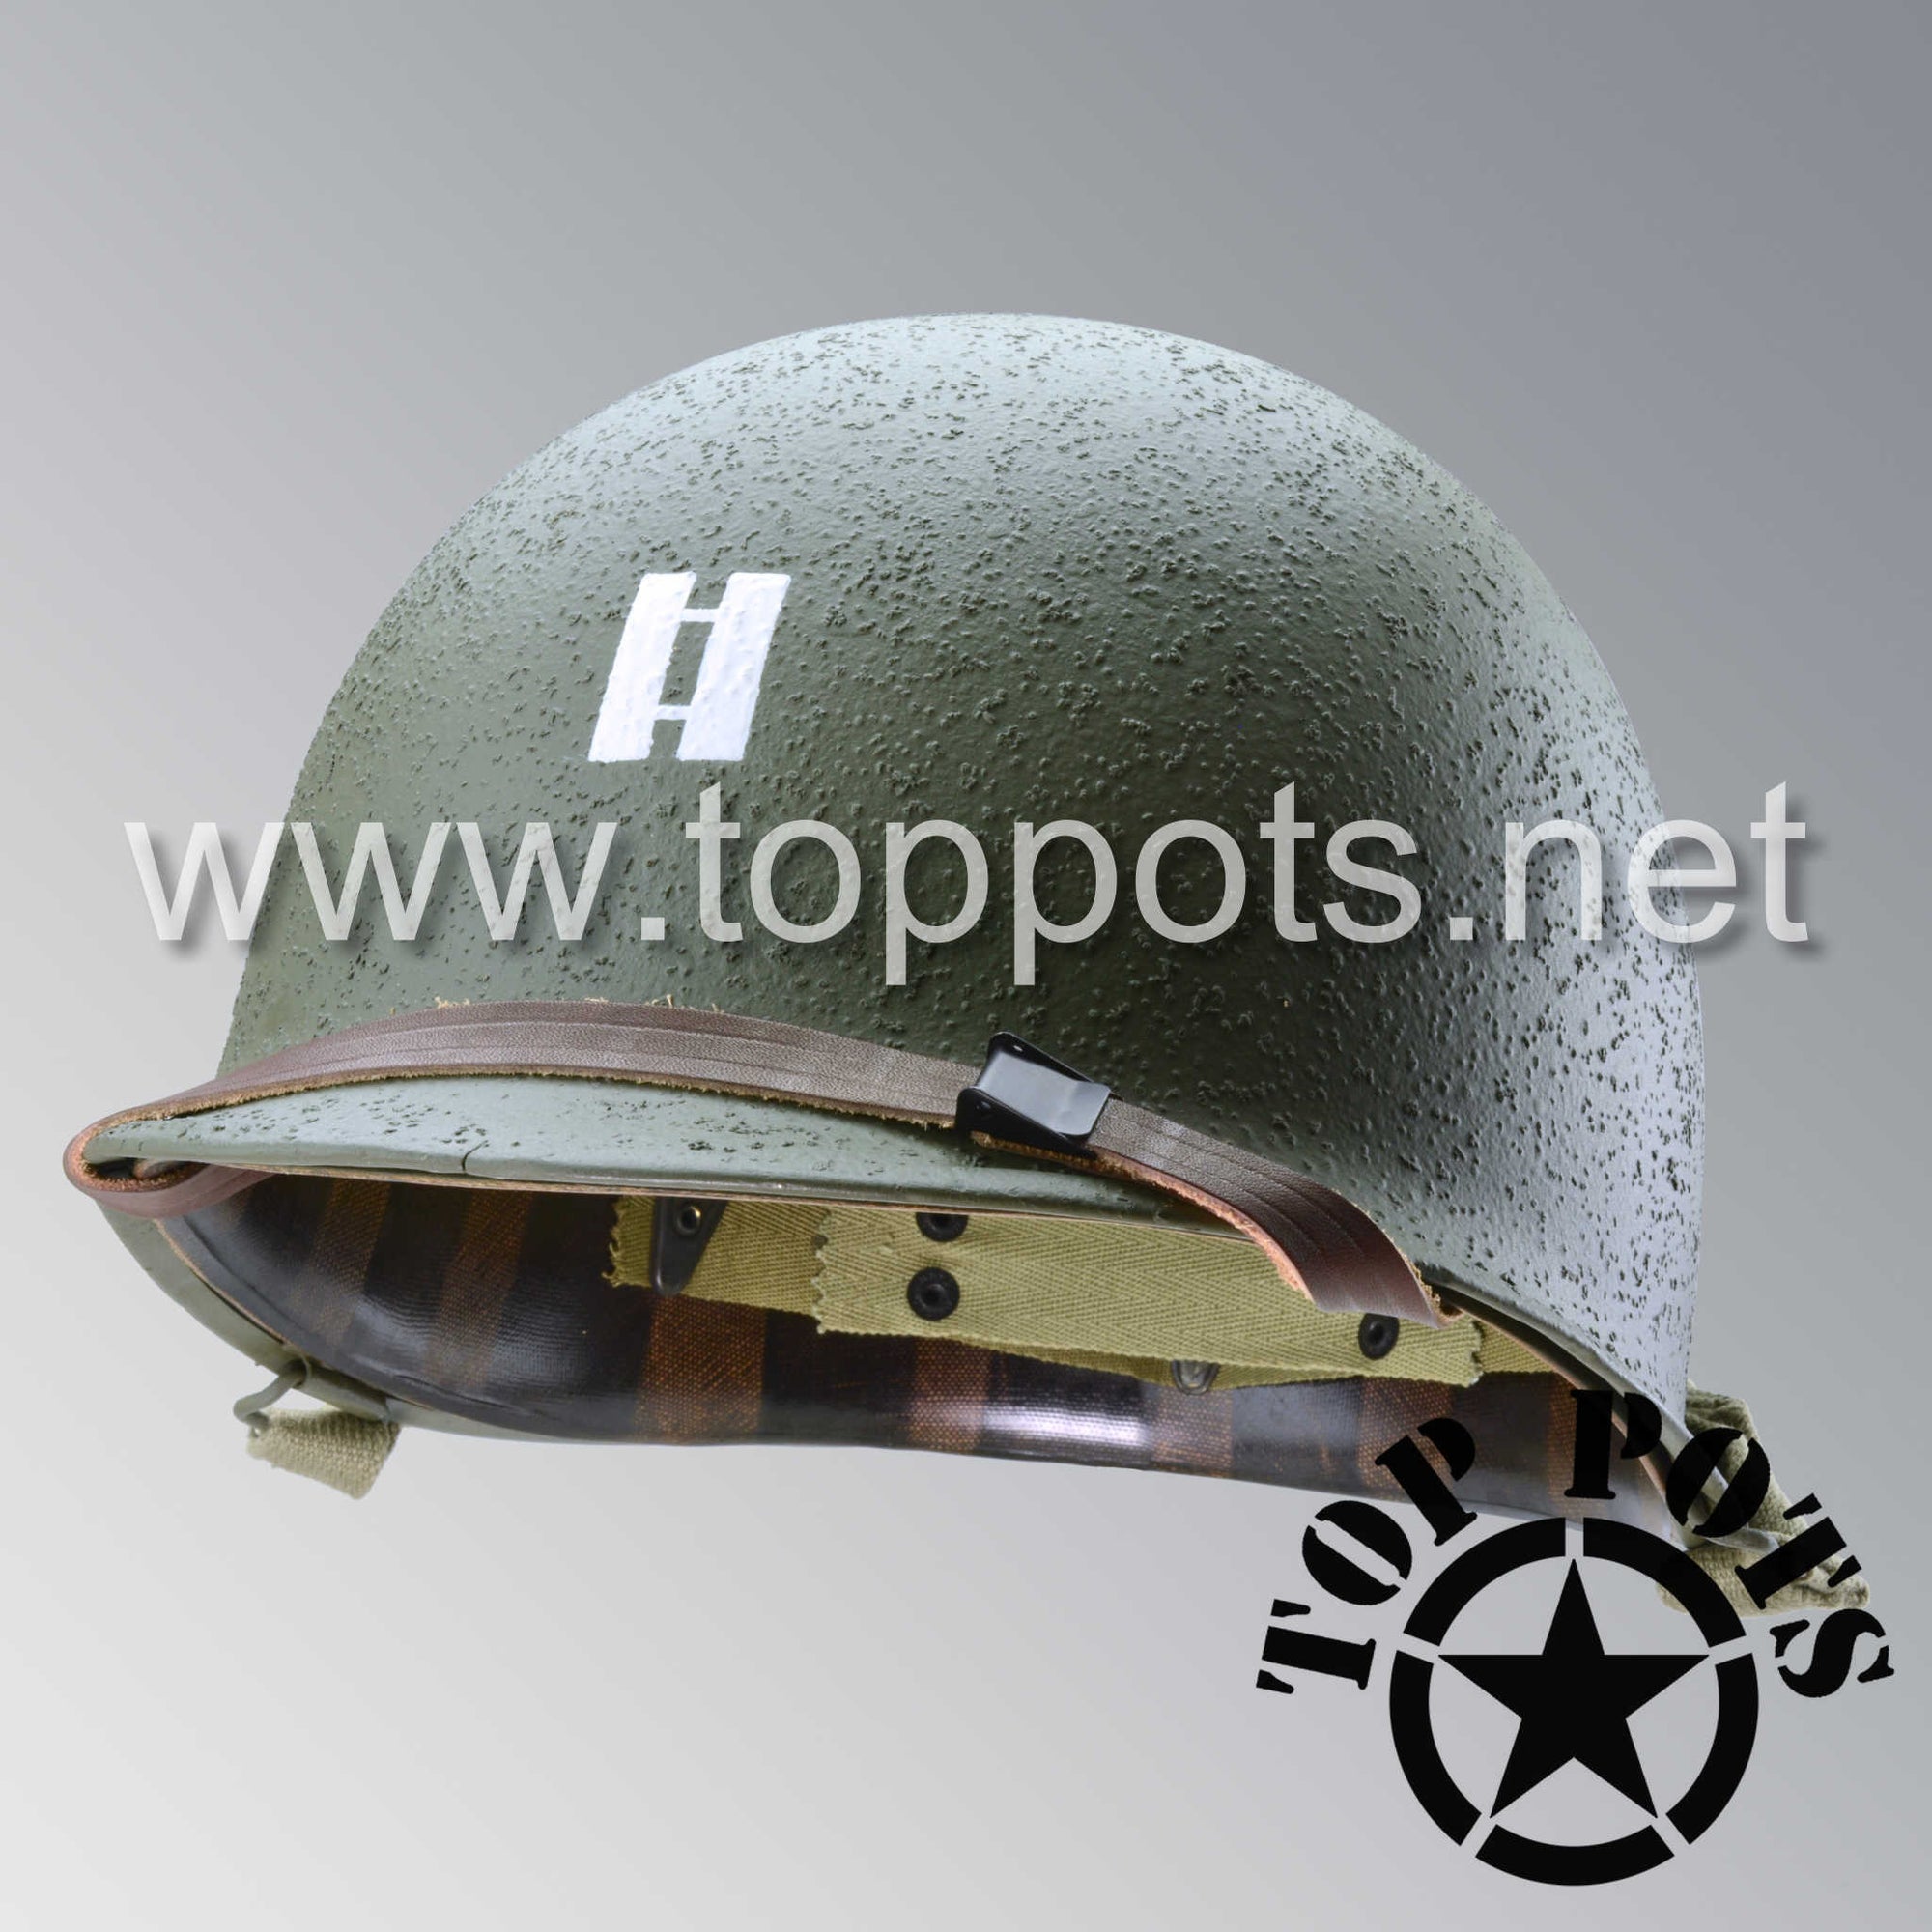 WWII US Army Restored Original M1 Infantry Helmet Swivel Bale Shell and Liner with 2nd Ranger Captain Miller Rank and Leadership Stripe